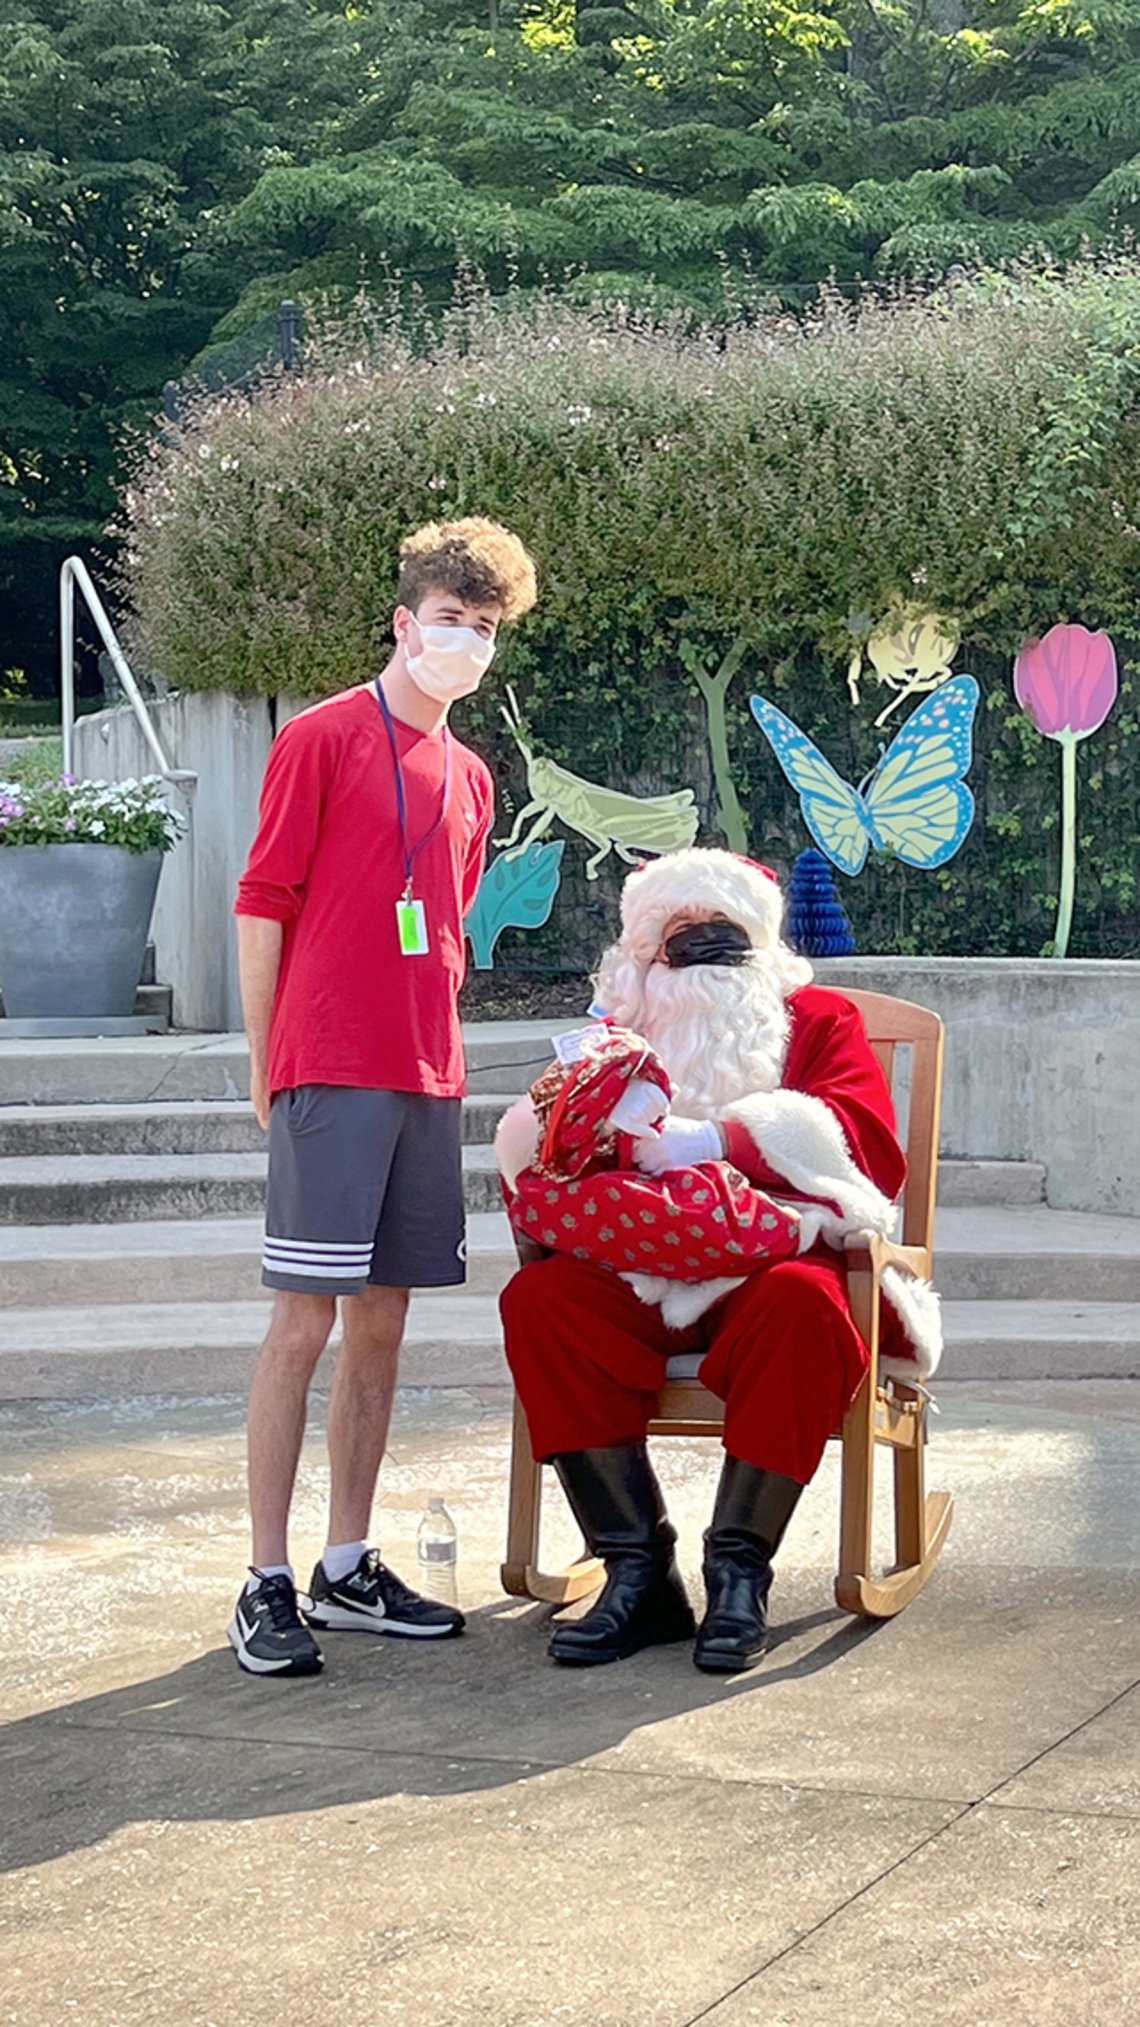 Youngster stands beside seated Santa